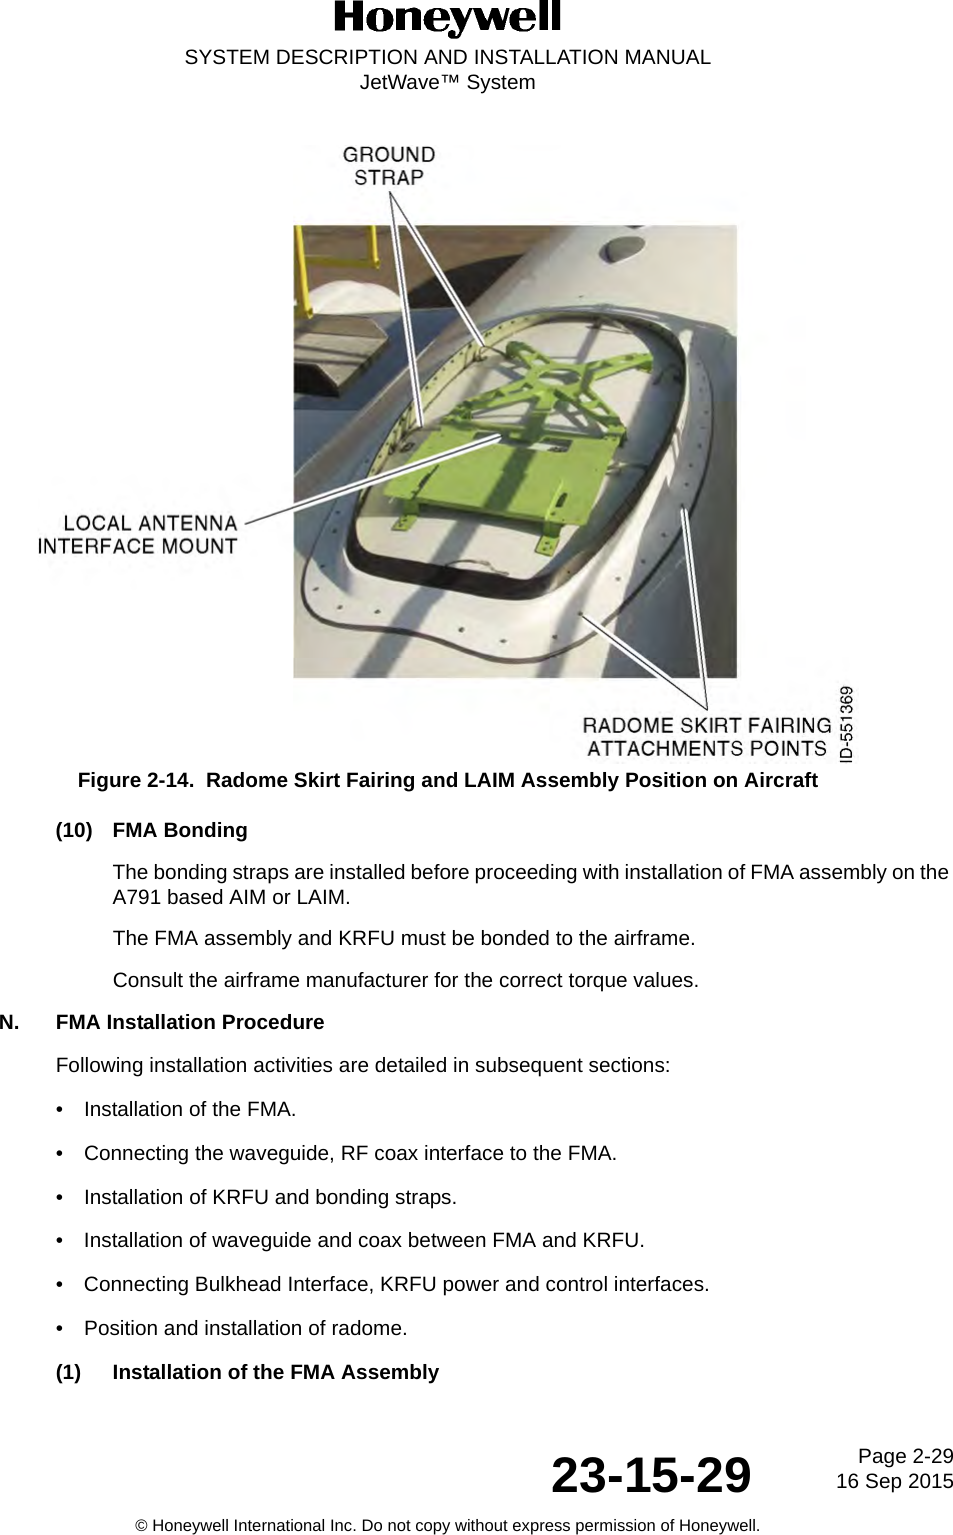 Page 2-29 16 Sep 201523-15-29SYSTEM DESCRIPTION AND INSTALLATION MANUALJetWave™ System© Honeywell International Inc. Do not copy without express permission of Honeywell.Figure 2-14.  Radome Skirt Fairing and LAIM Assembly Position on Aircraft (10) FMA BondingThe bonding straps are installed before proceeding with installation of FMA assembly on the A791 based AIM or LAIM. The FMA assembly and KRFU must be bonded to the airframe. Consult the airframe manufacturer for the correct torque values. N. FMA Installation ProcedureFollowing installation activities are detailed in subsequent sections: • Installation of the FMA.• Connecting the waveguide, RF coax interface to the FMA. • Installation of KRFU and bonding straps. • Installation of waveguide and coax between FMA and KRFU. • Connecting Bulkhead Interface, KRFU power and control interfaces. • Position and installation of radome. (1) Installation of the FMA Assembly